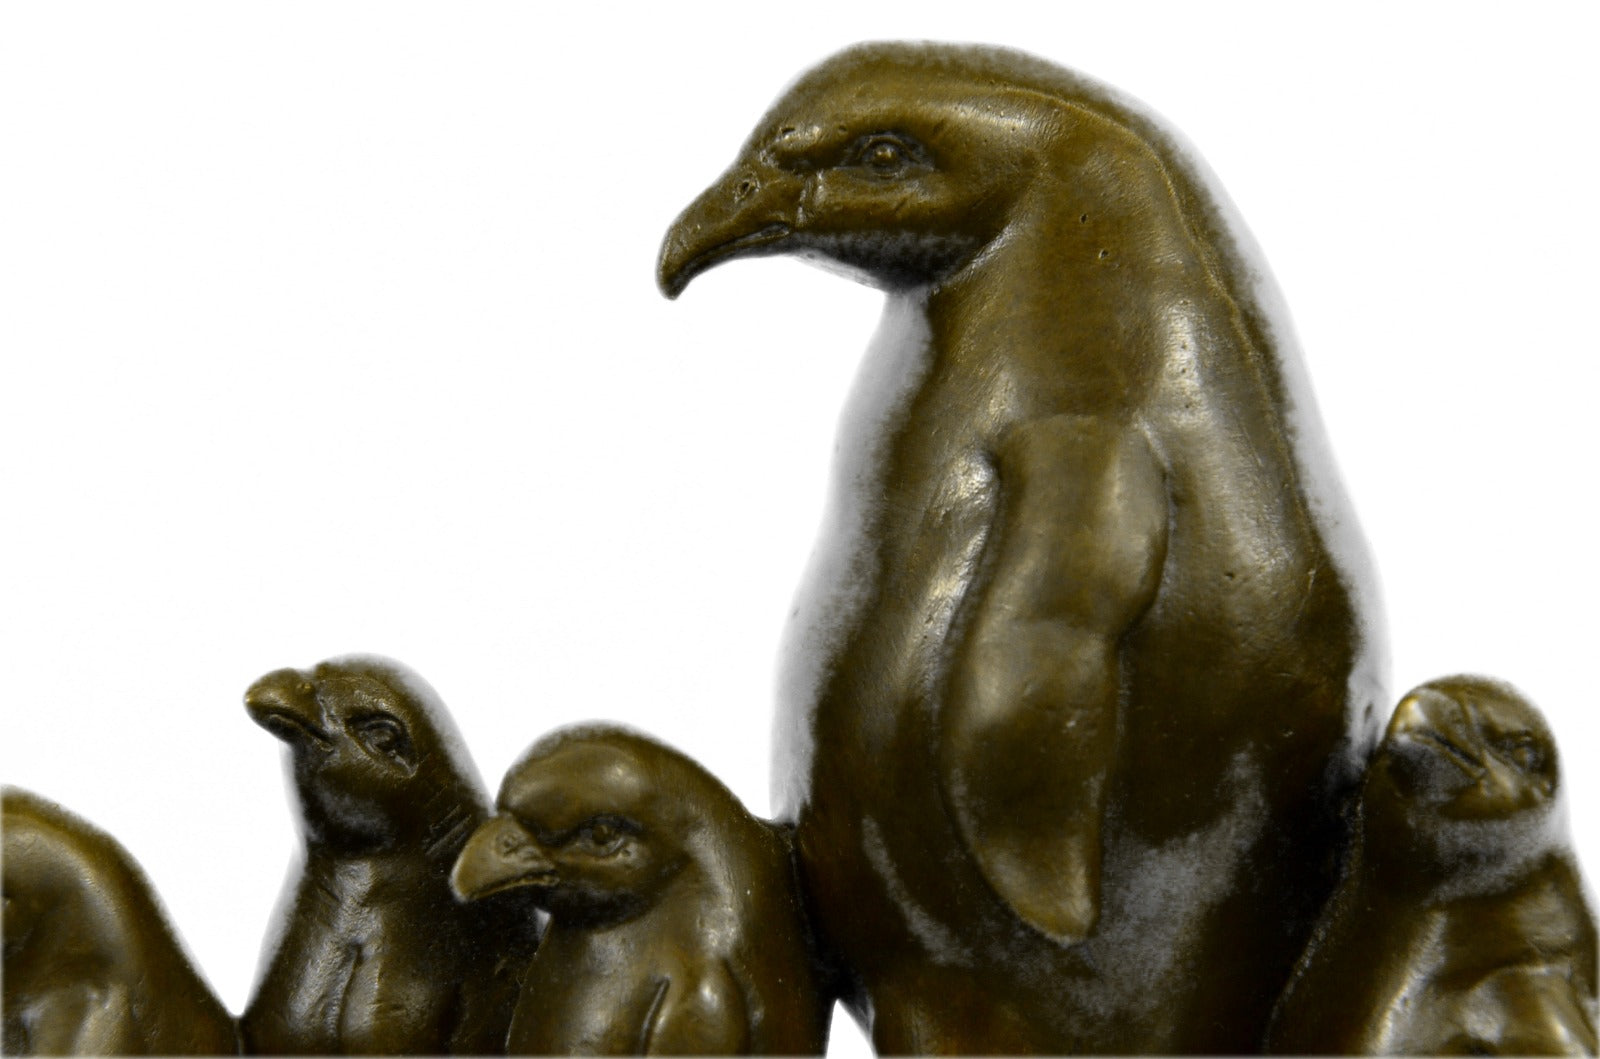 Handcrafted bronze sculpture SALE Marble Deco Art Chicks 4 With Penguin